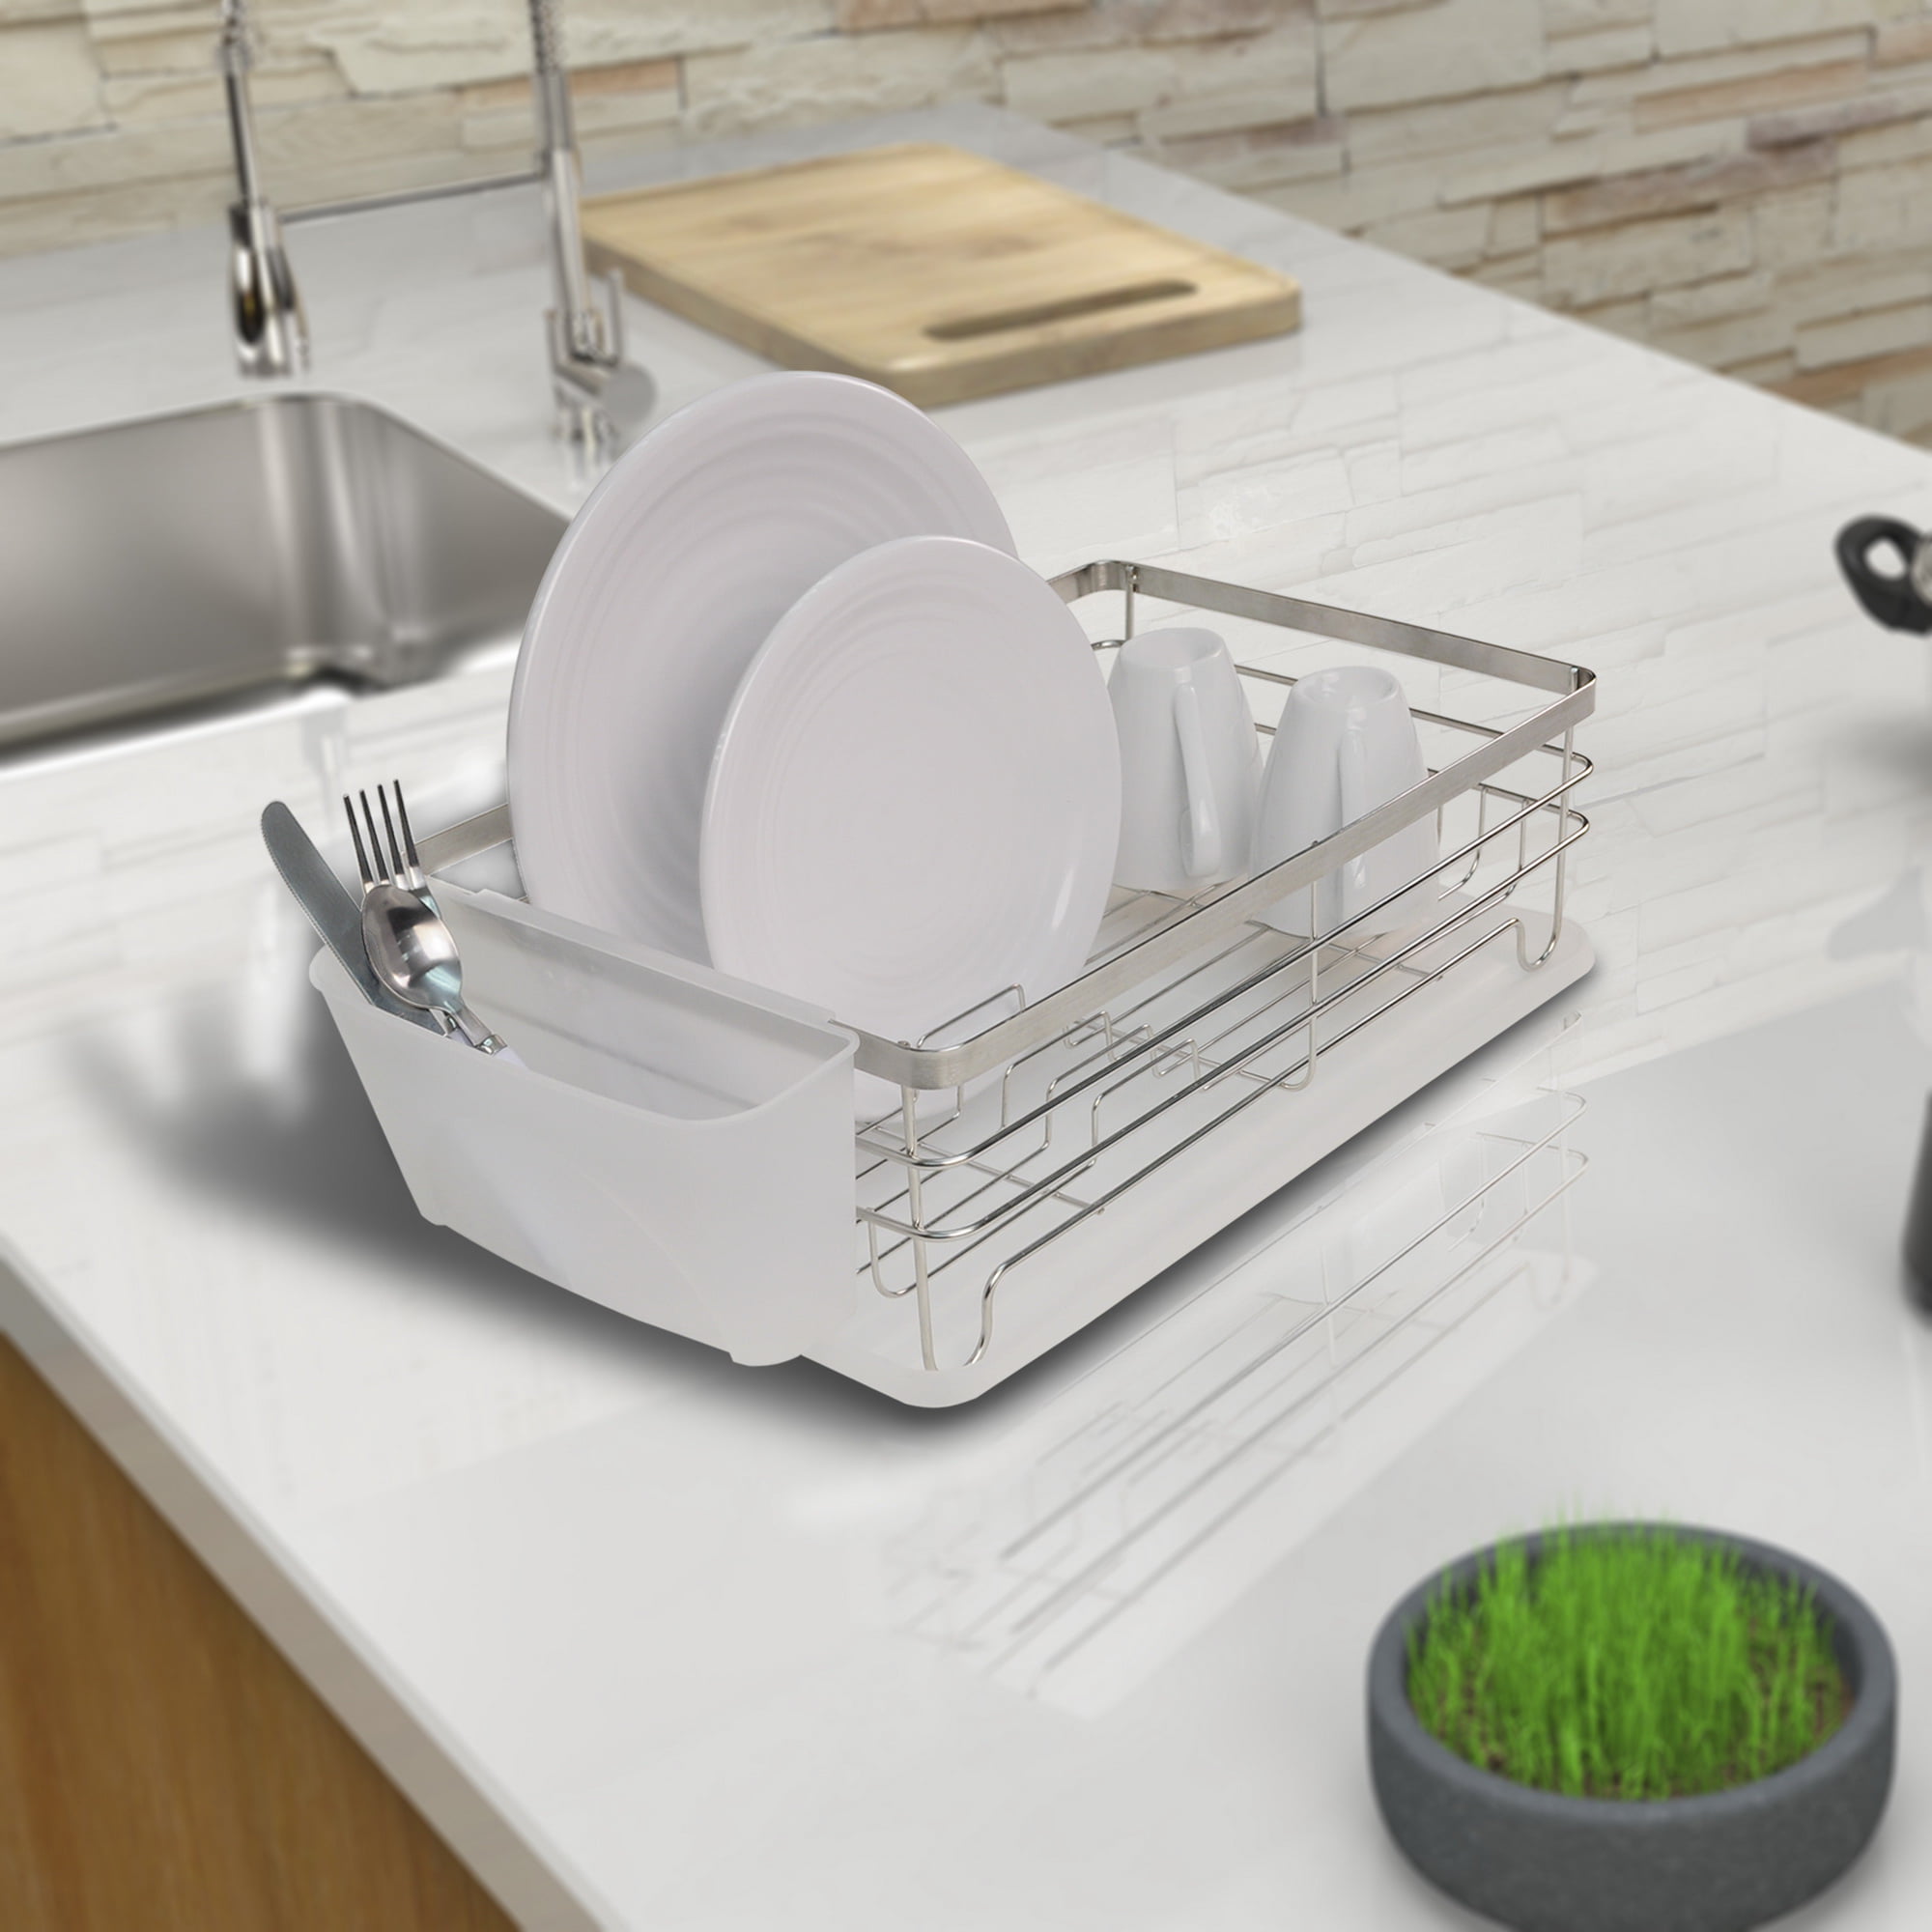 UNHO Stainless Steel Dish Rack & Reviews